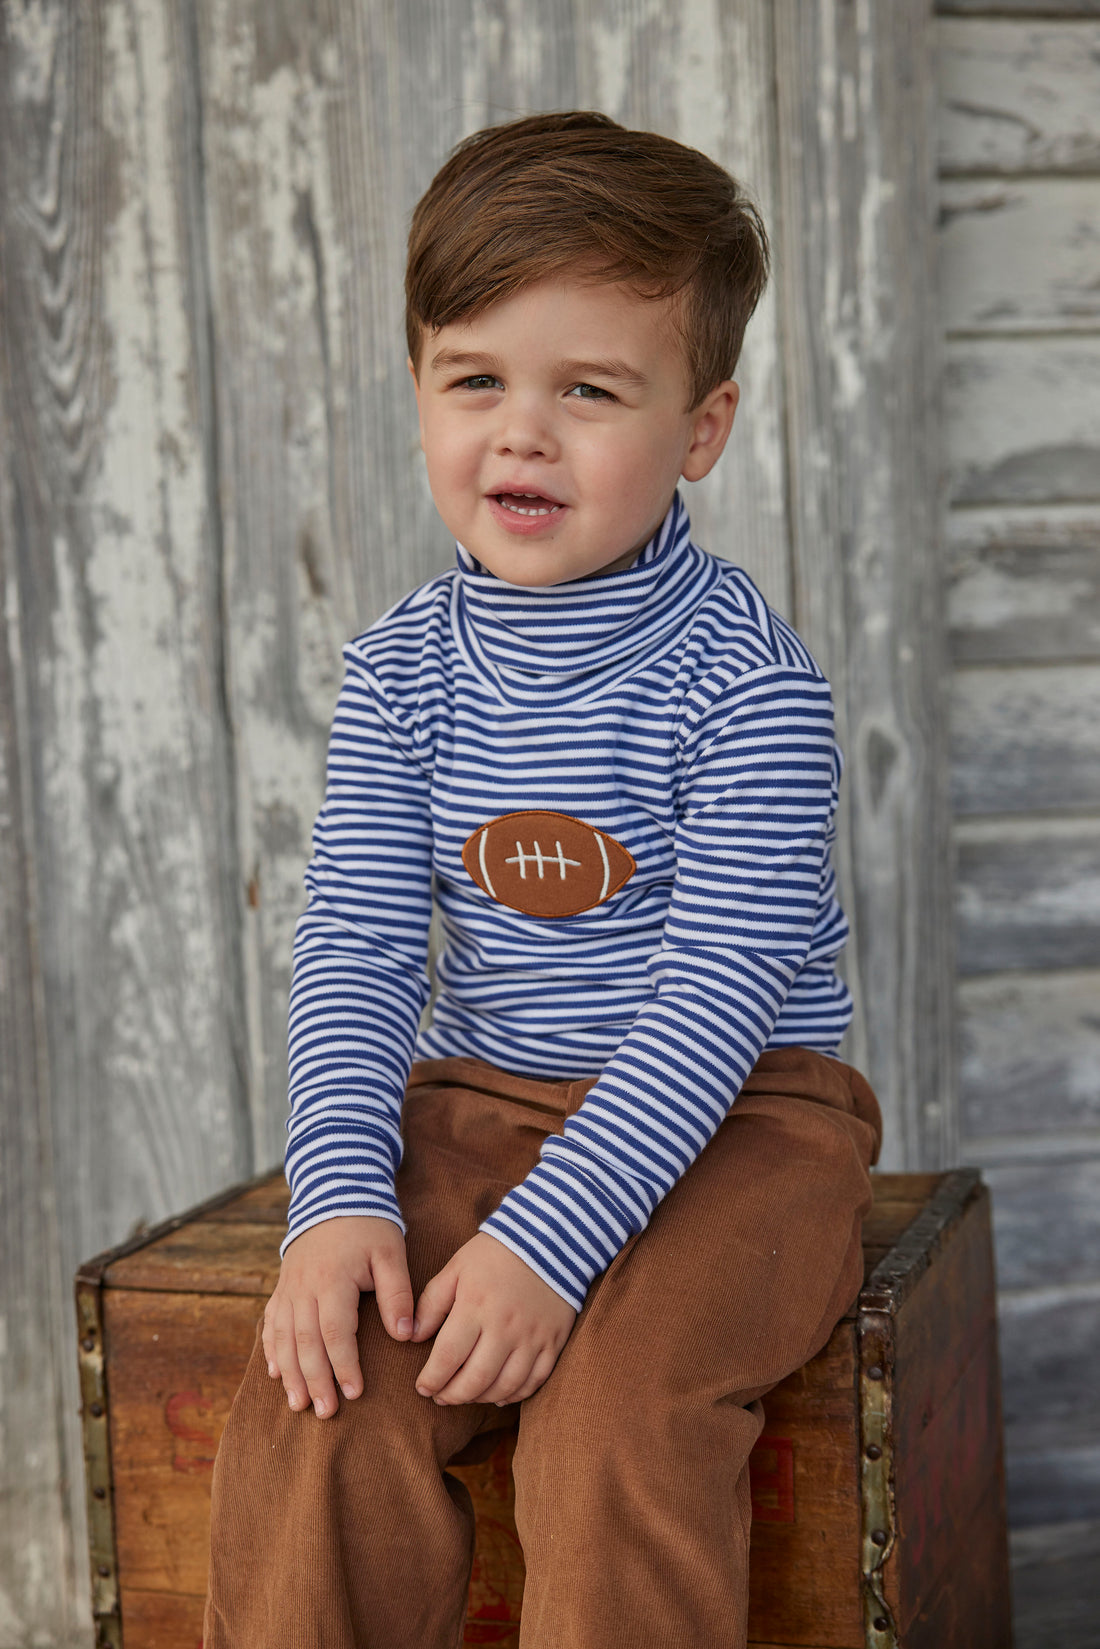 Little English toddler boy classic children’s apparel blue and white stripe knit turtleneck with football applique on chest 